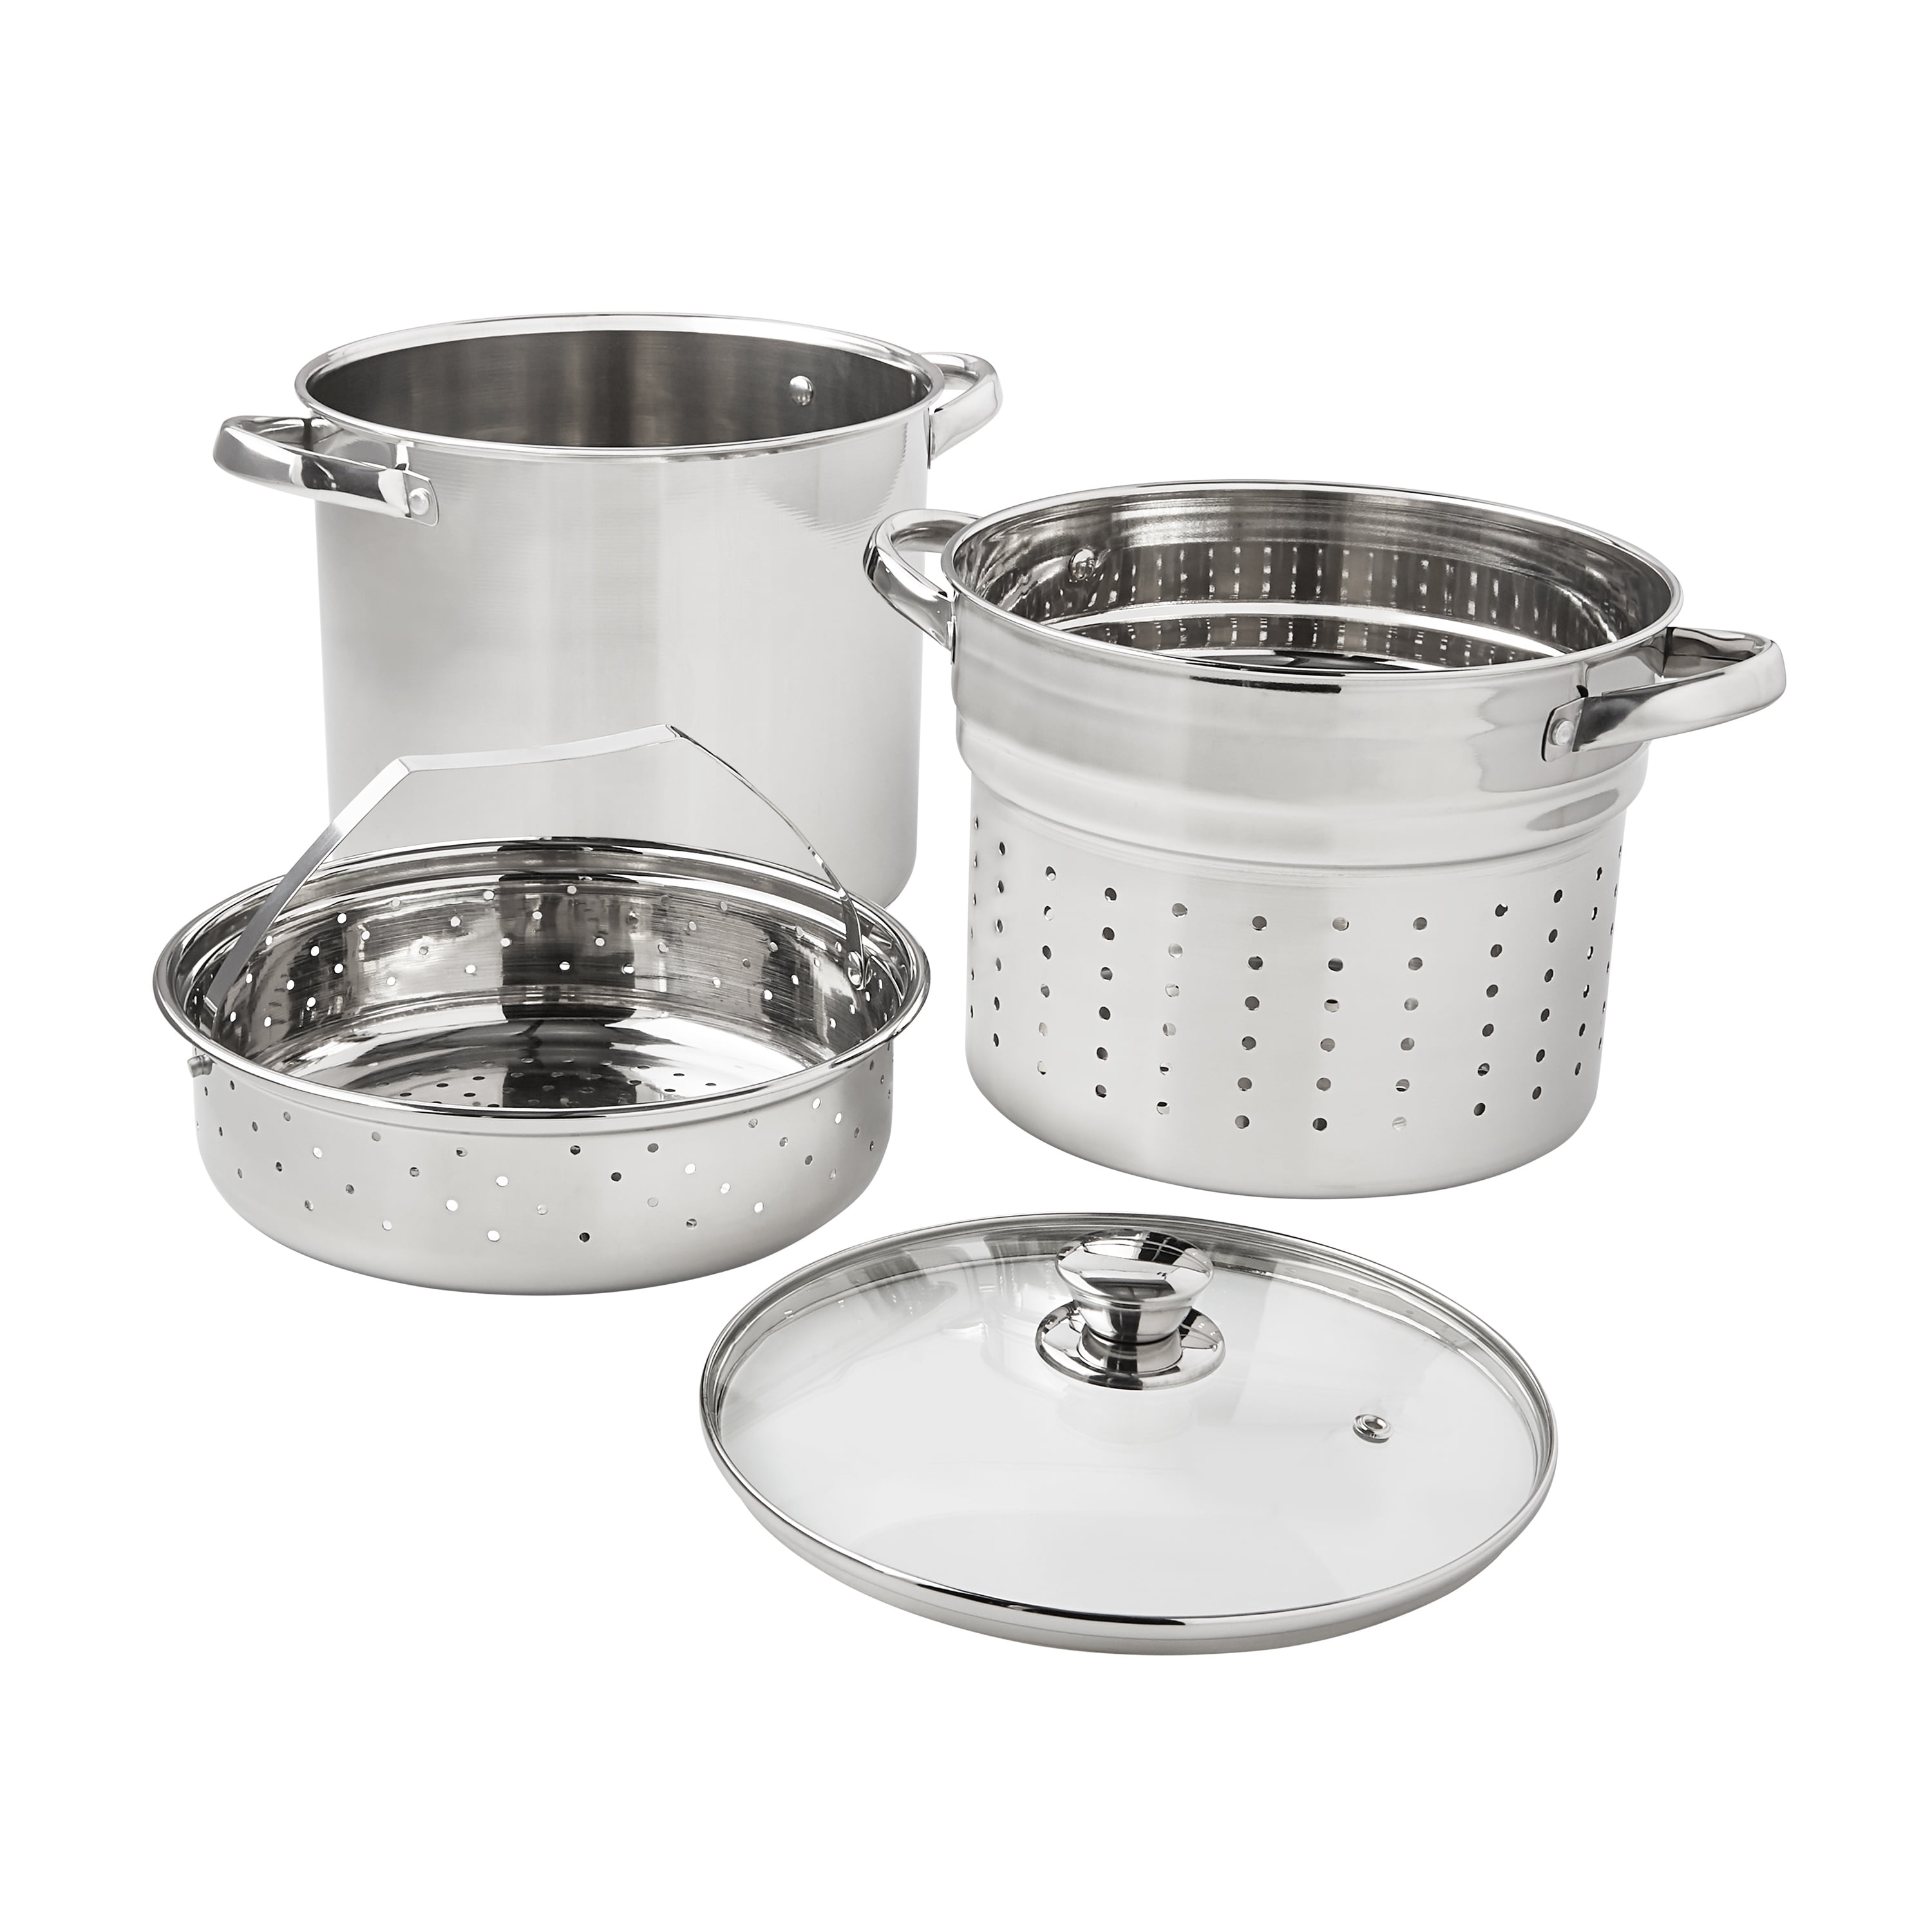 Cook N Home Pasta Pot with Strainer Lid 8-Quart, Stainless Steel Pasta  Cooker Steamer Multipots, 4-Piece 